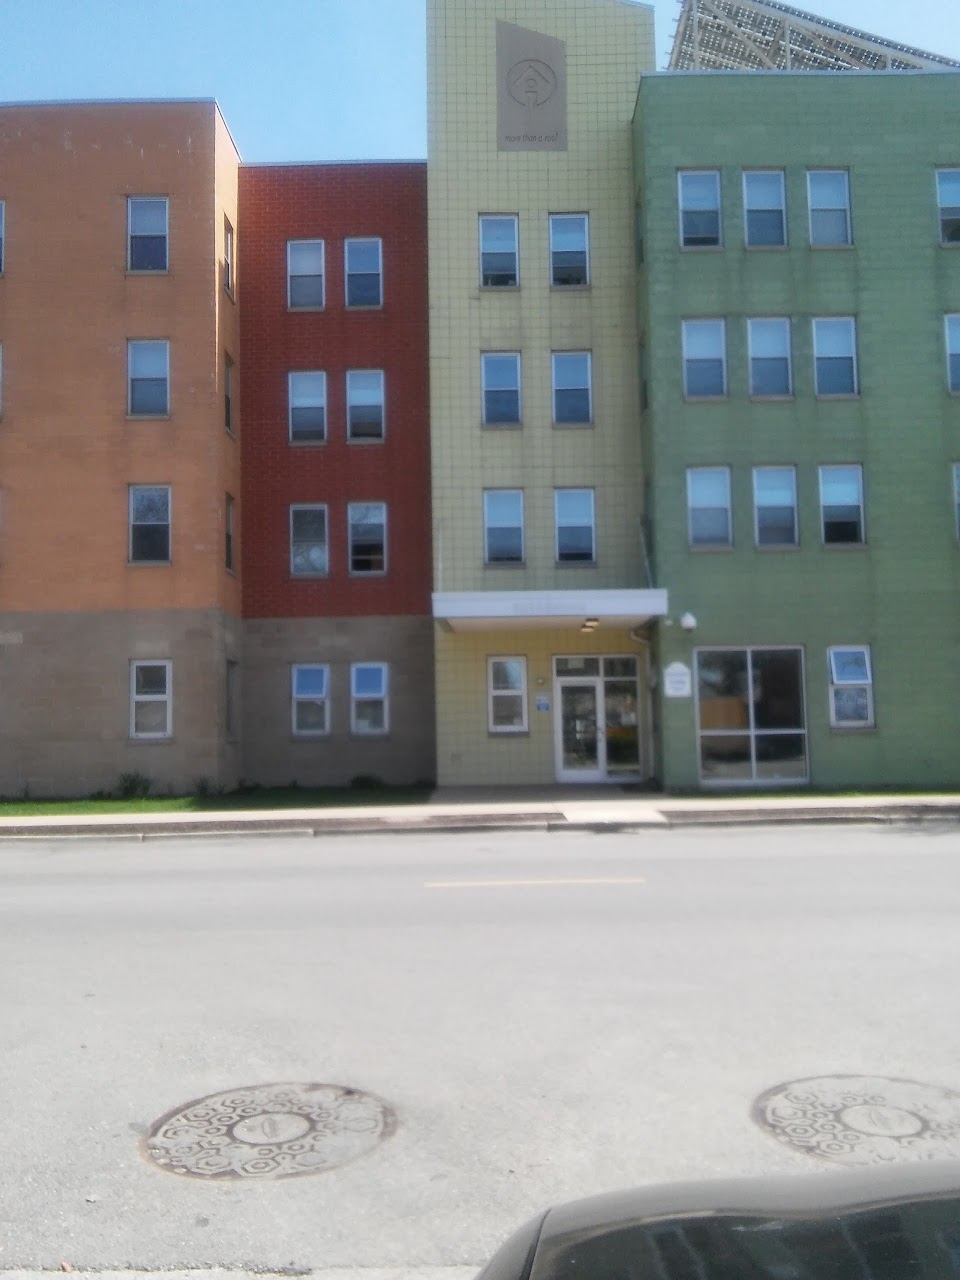 Photo of WENTWORTH COMMONS. Affordable housing located at 11045 S WENTWORTH AVE CHICAGO, IL 60628